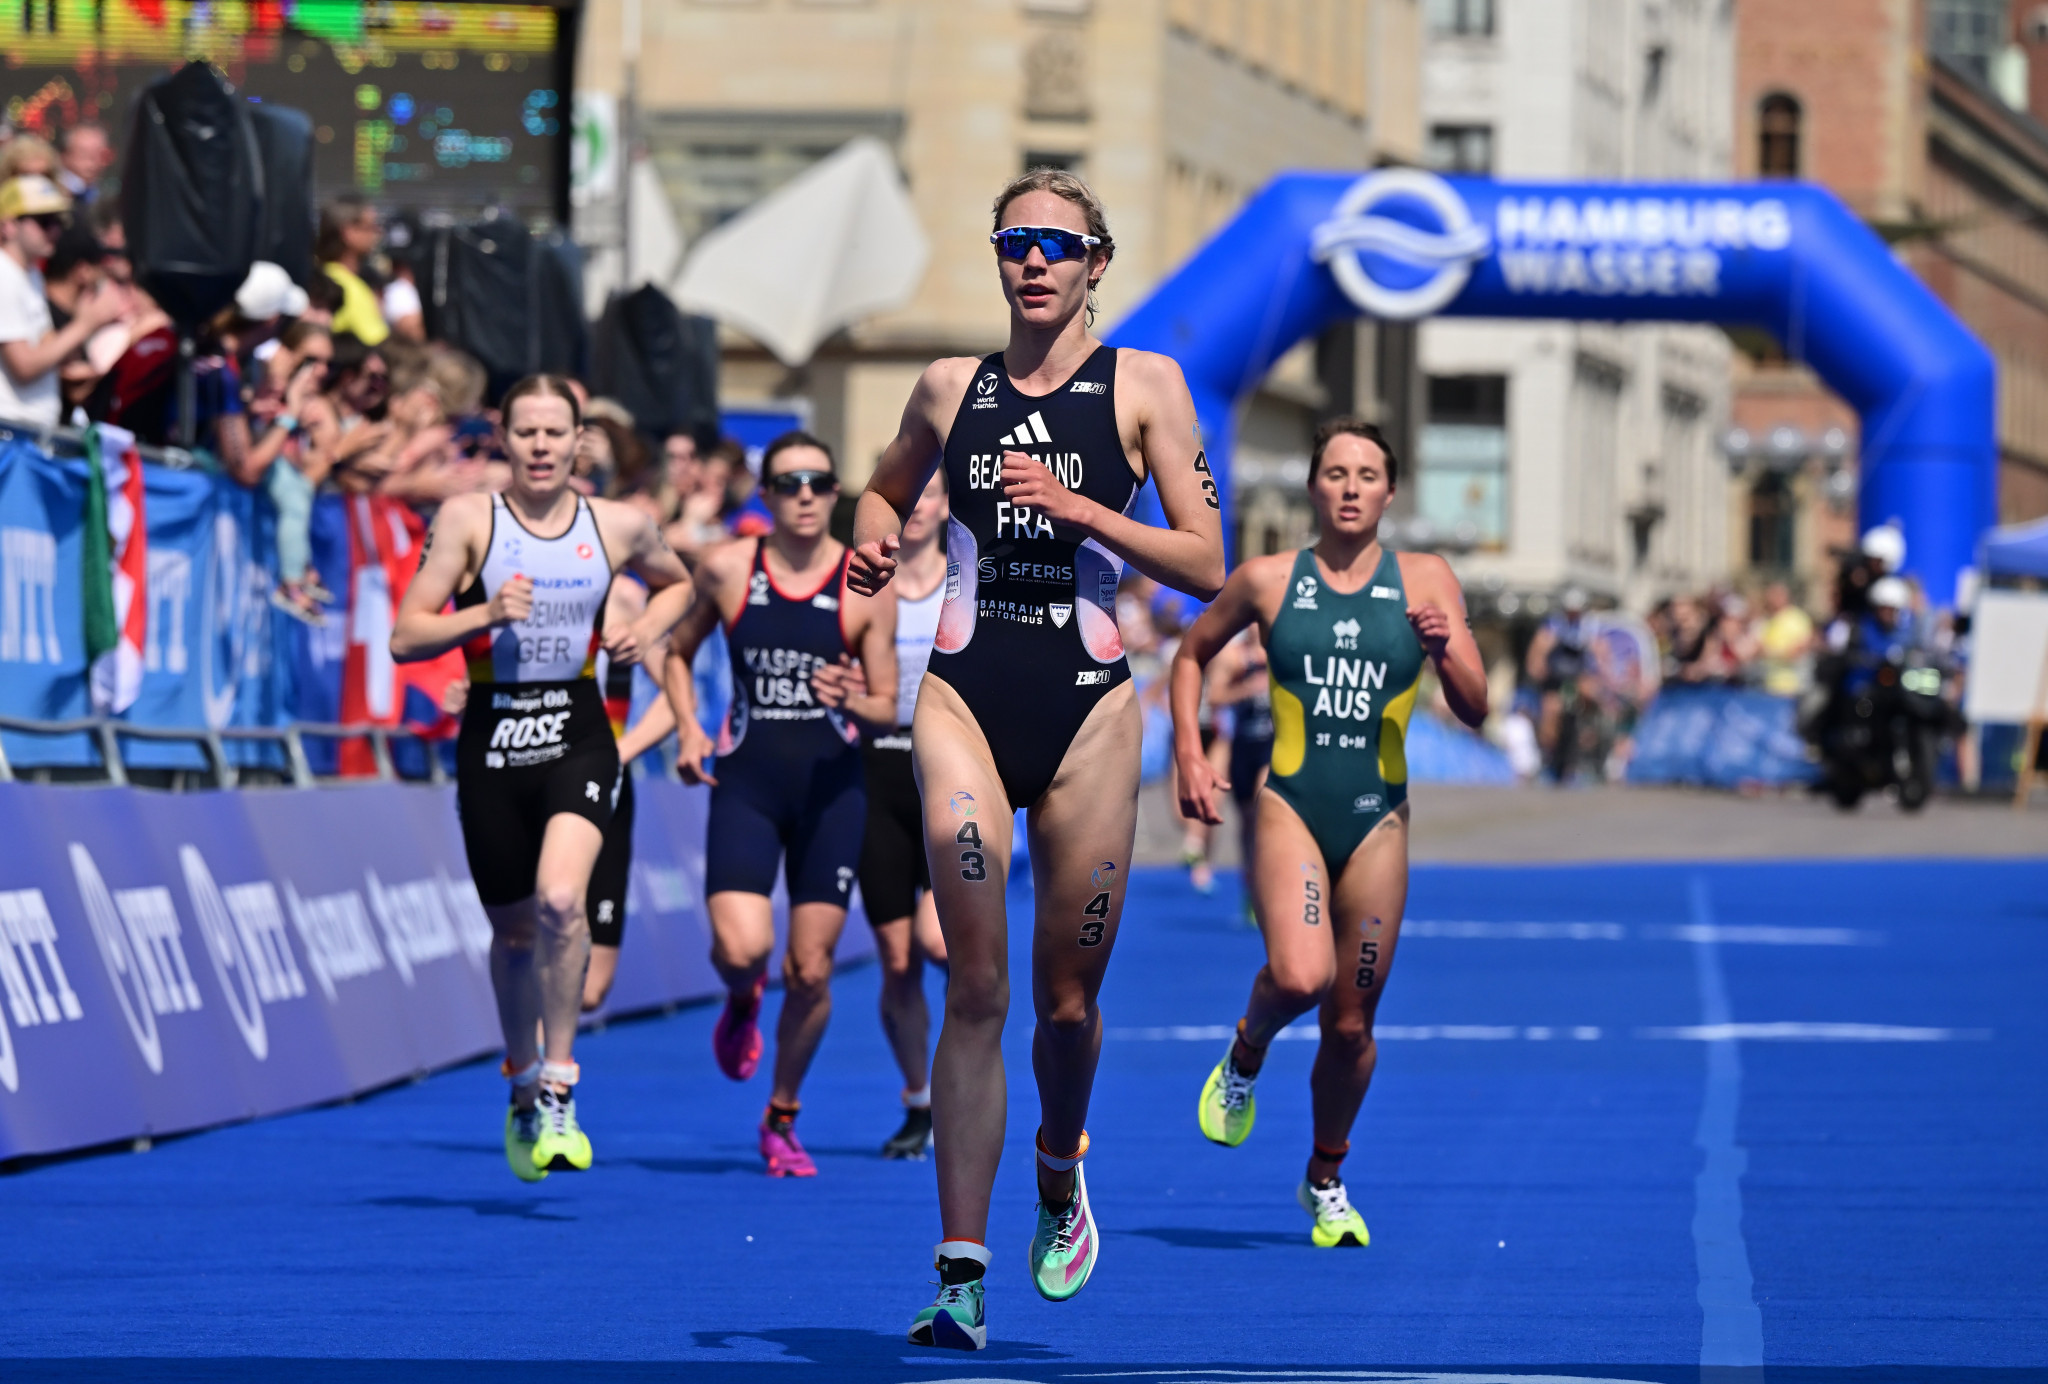 Cassandre Beaugrand's blistering time made her favourite to take the first women's super-sprint title ©World Triathlon